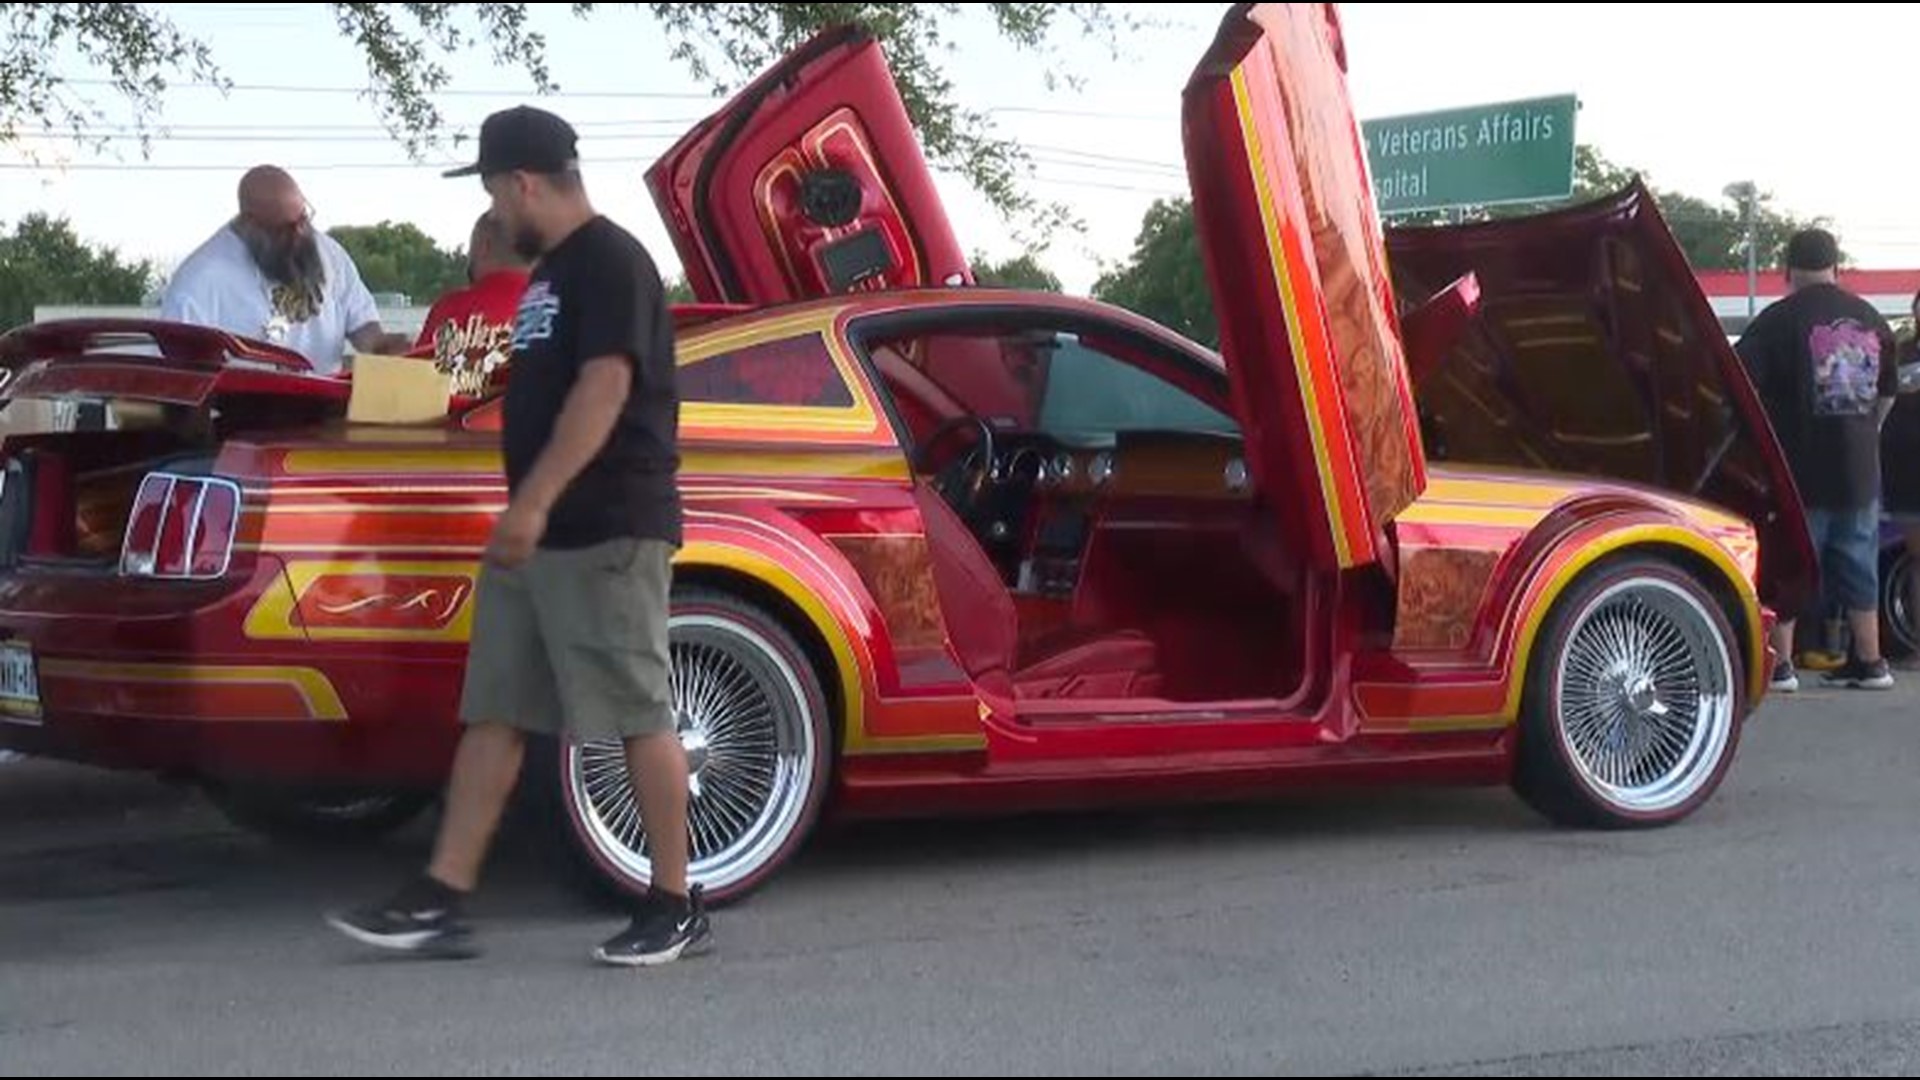 Parking lots along Valley Mills Drive were filled with car enthusiasts and their rides showing off their work to the community as part of the event.